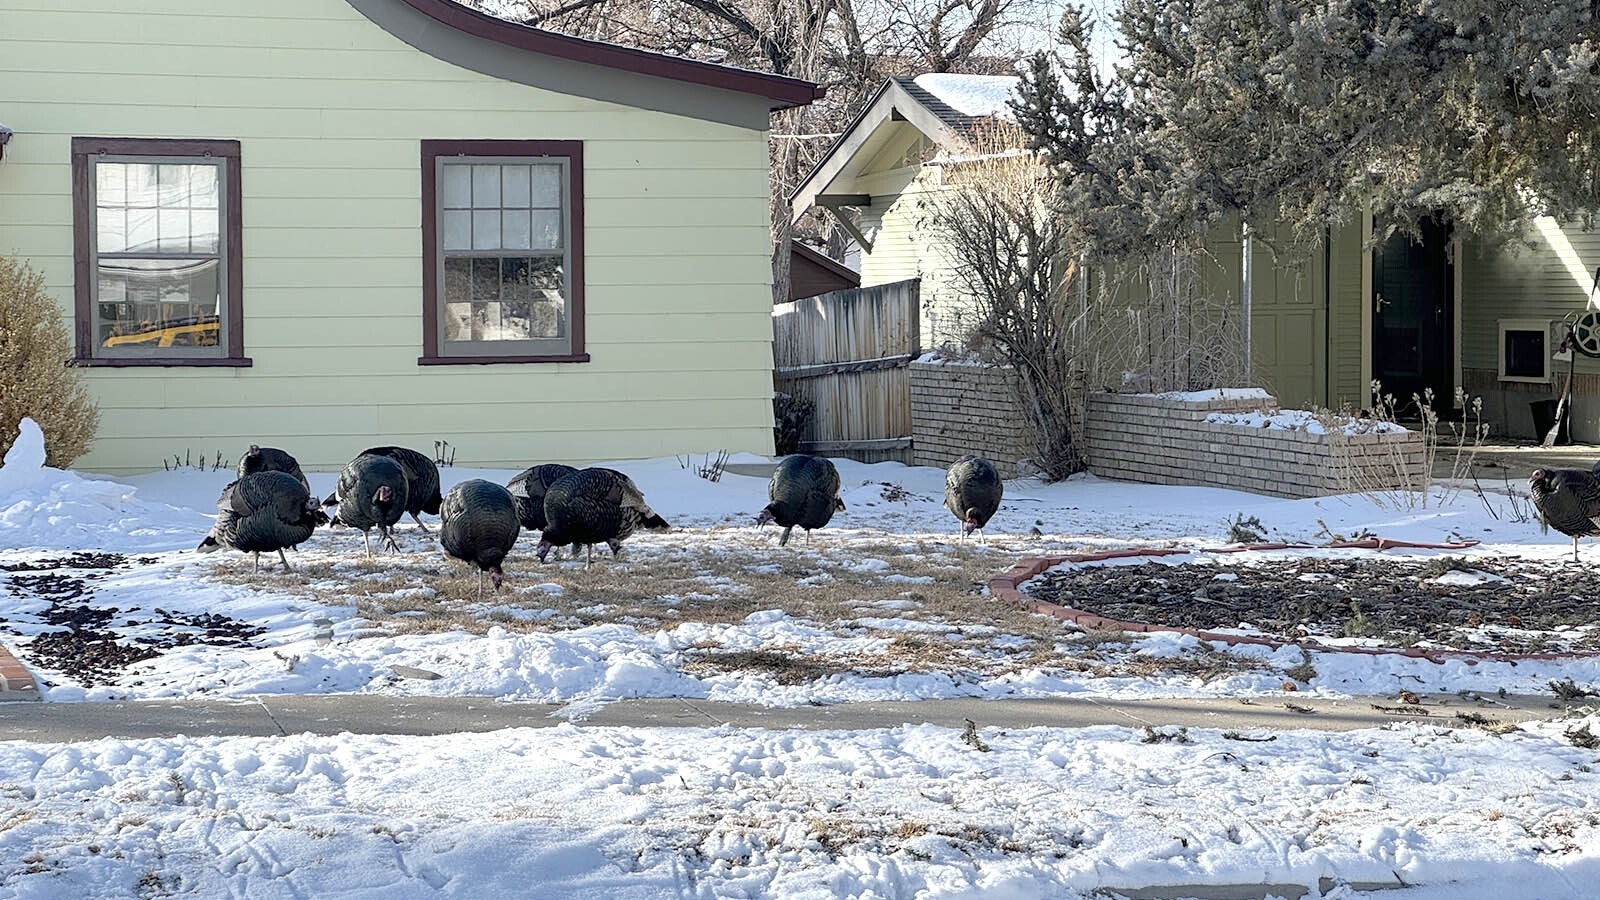 Flocks of wild turkeys are moving about Casper. Although the city outlawed feeding them about a year ago, it hasn't seemed to cut down on the wild turkeys coming into town.